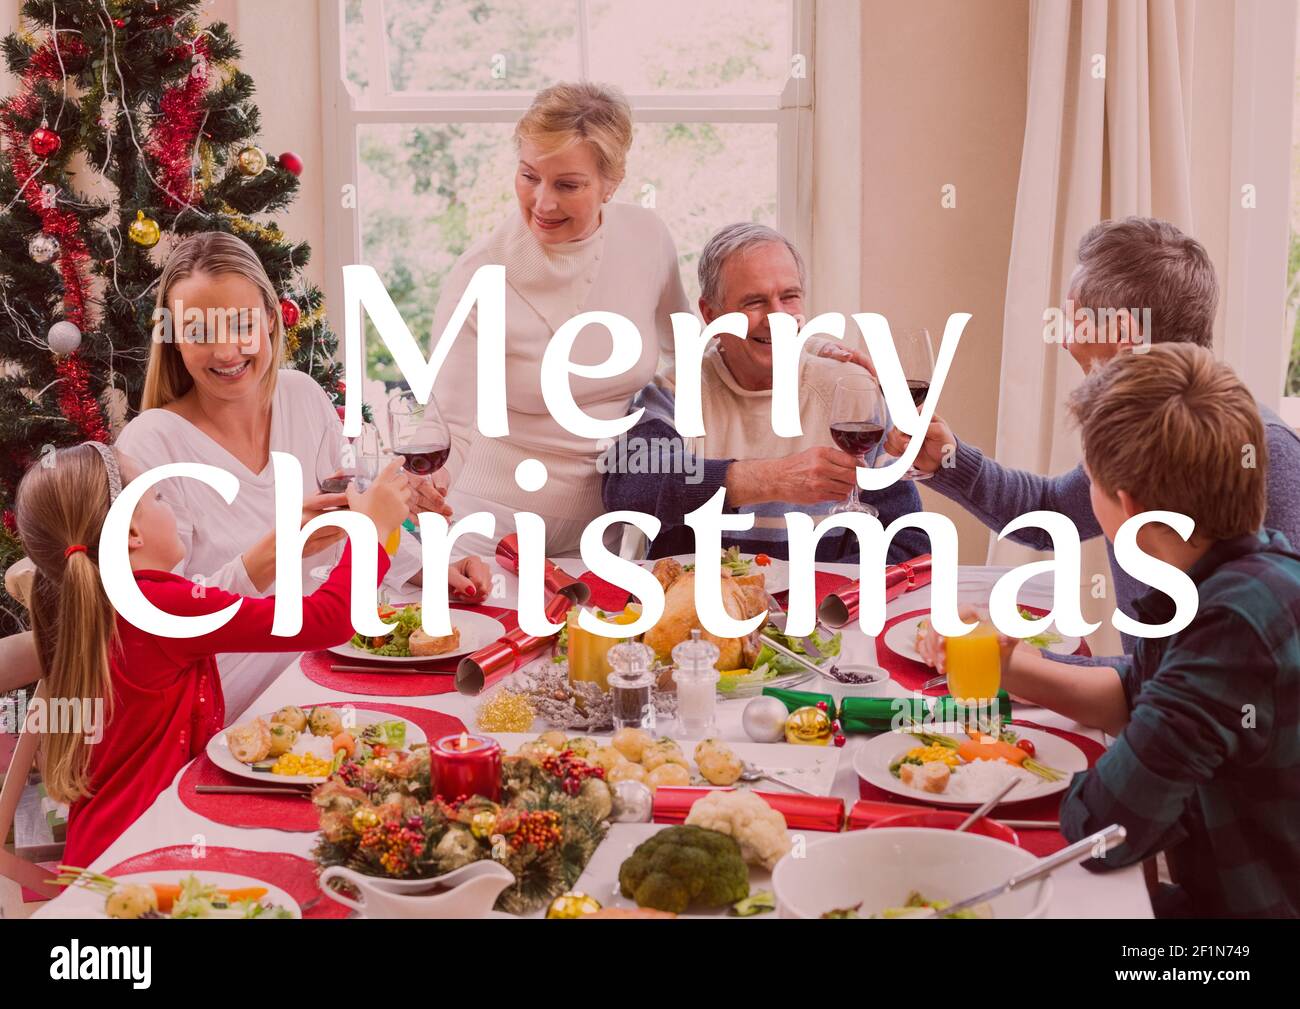 Merry christmas text over multi generation family having christmas dinner in background Stock Photo